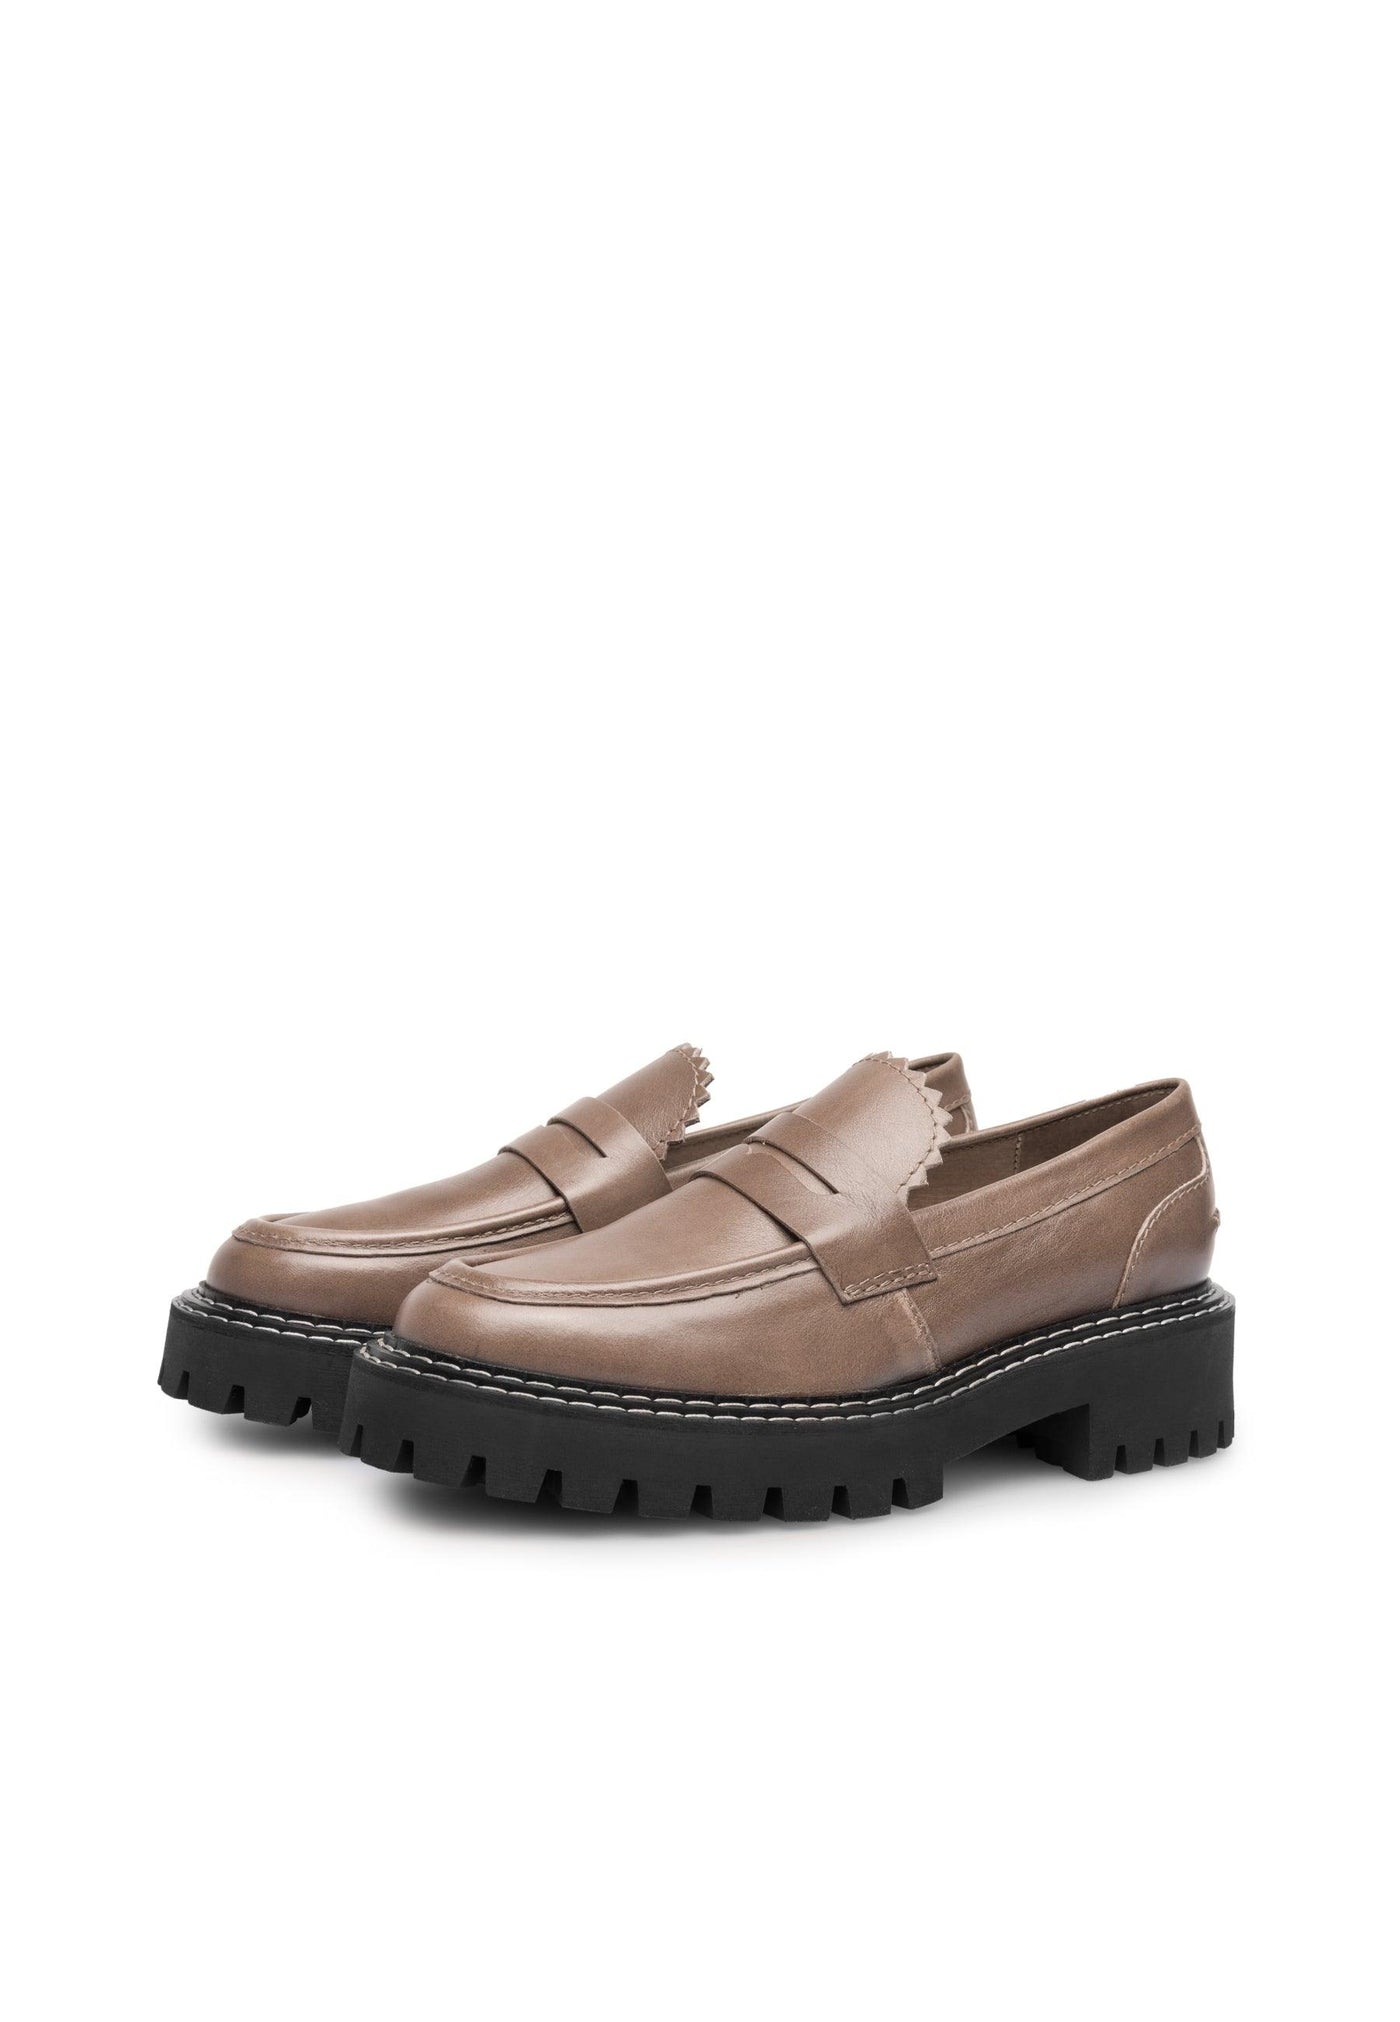 Matter Loafer - Leather - Taupe - Taupe - LÄST